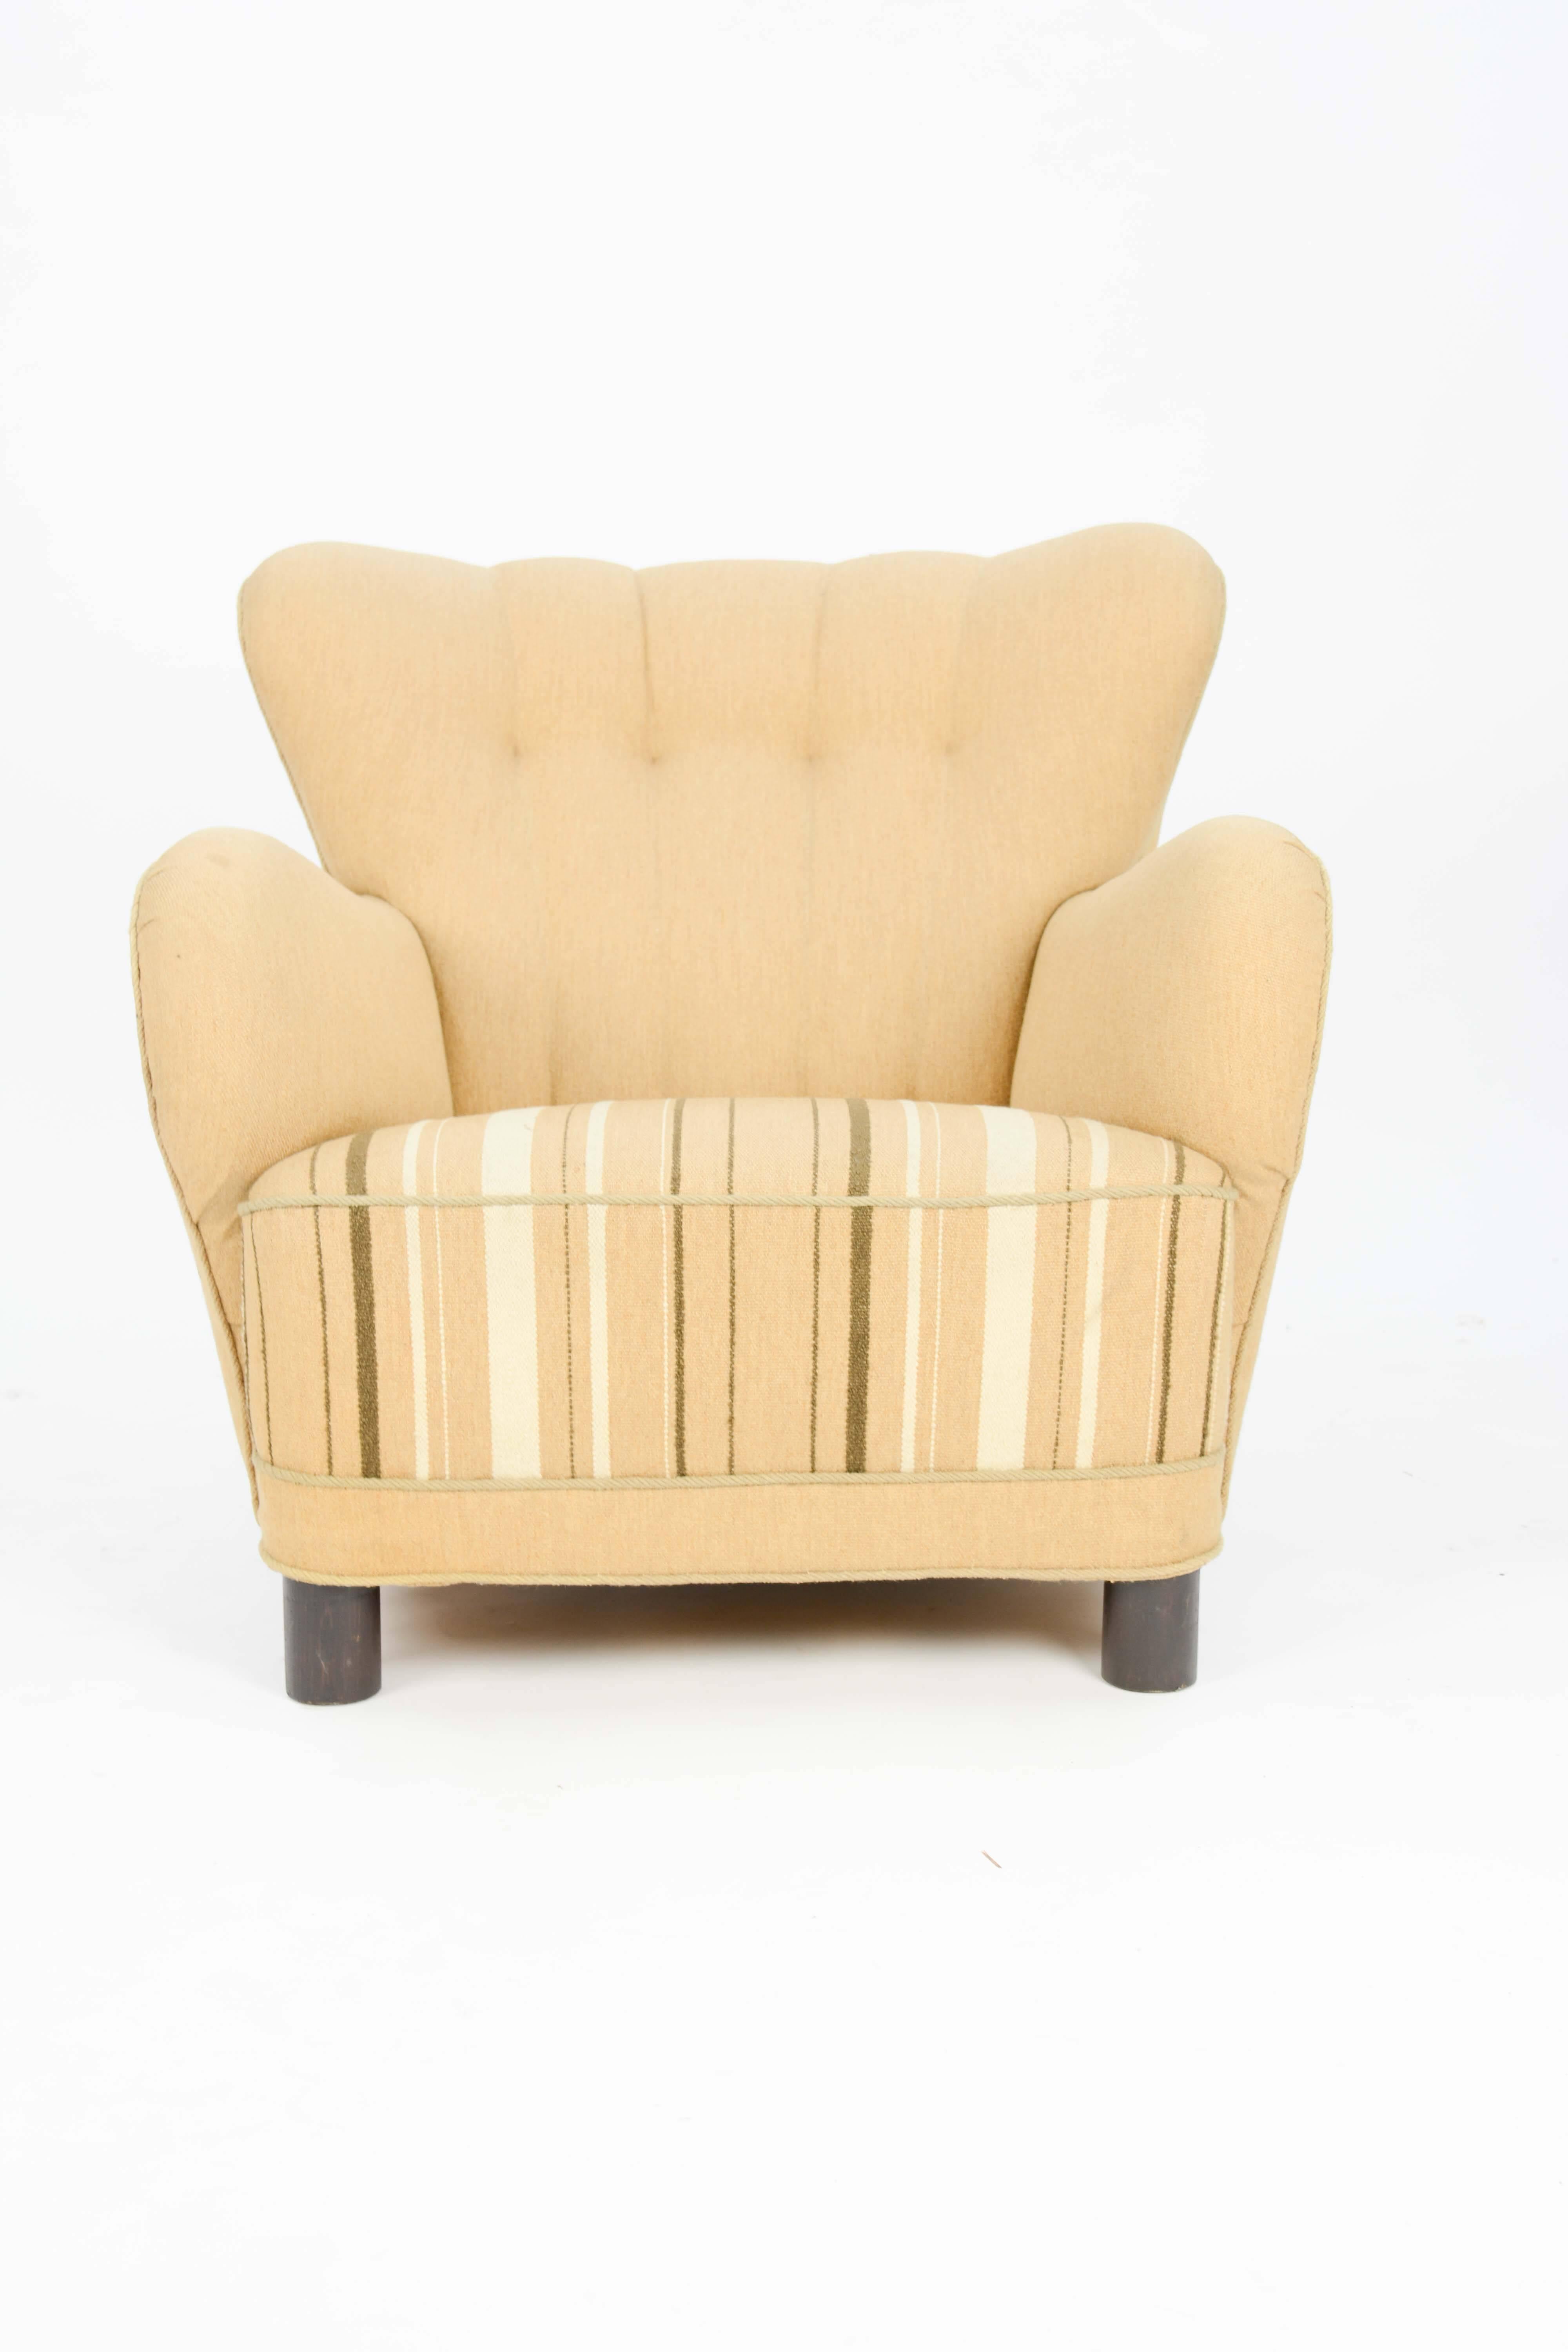 A 1940s, Danish club chair after Flemming Lassen in Burlap.